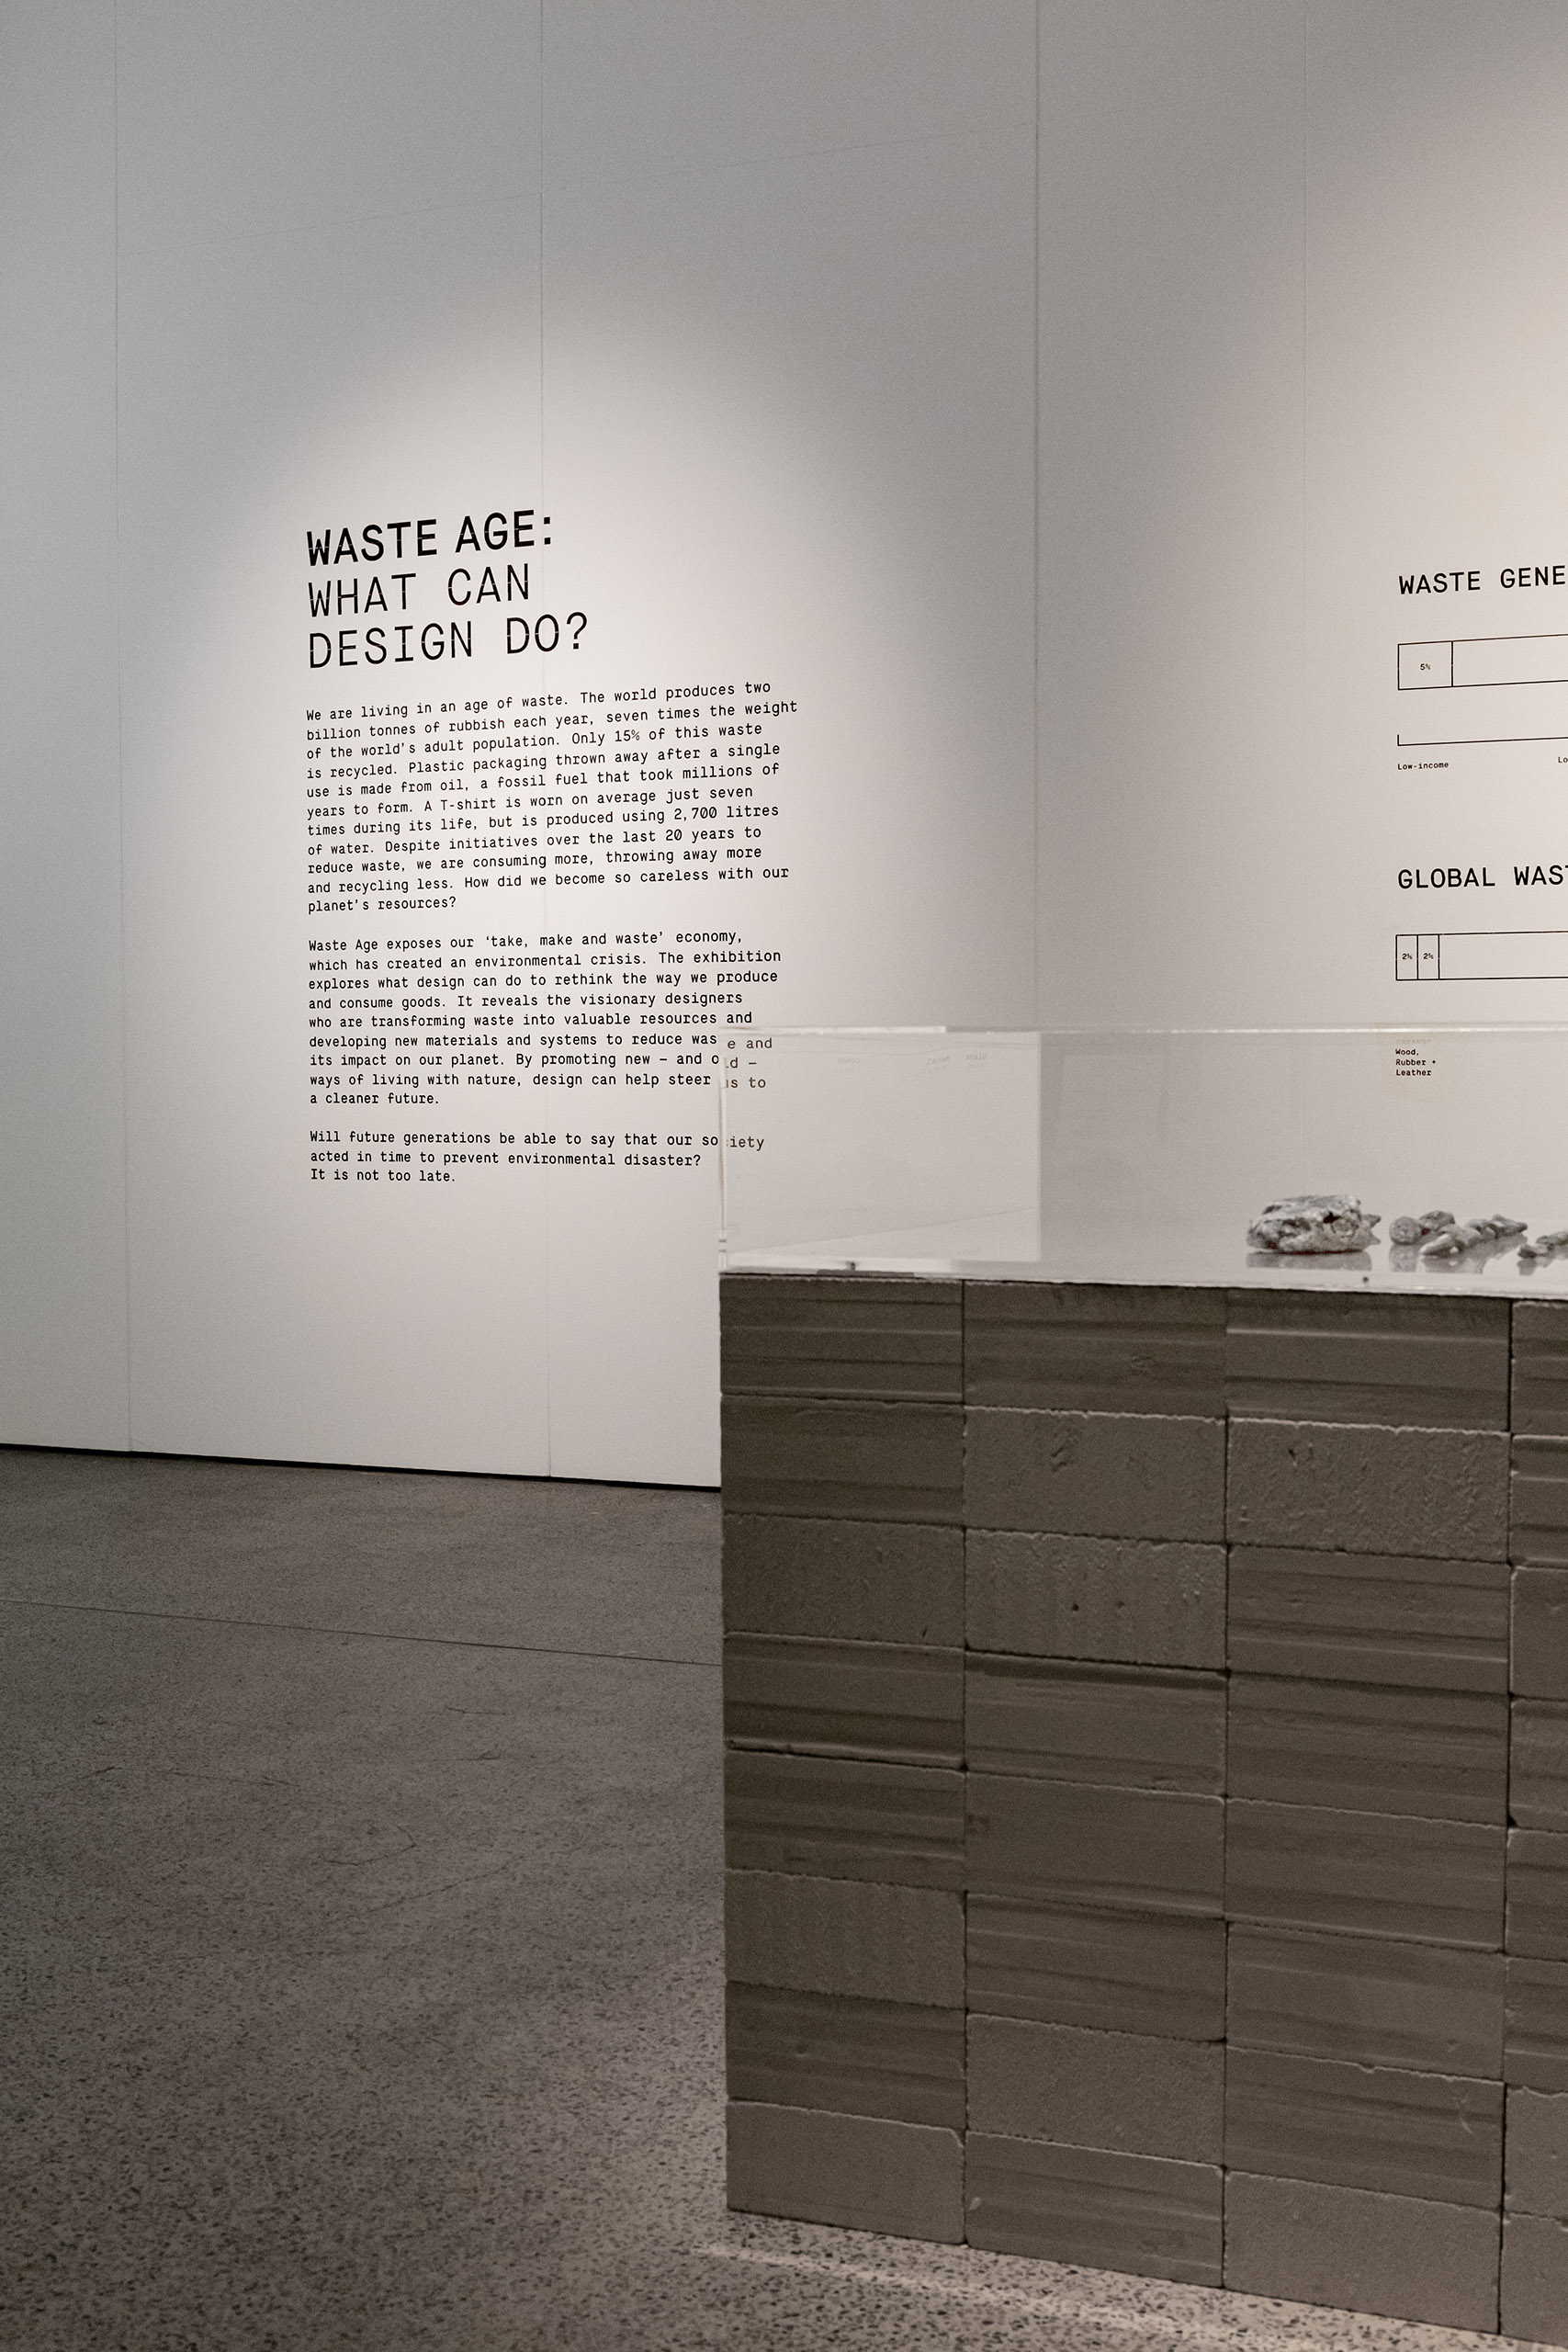 Waste crisis is a design-made mess says Waste Age show curator